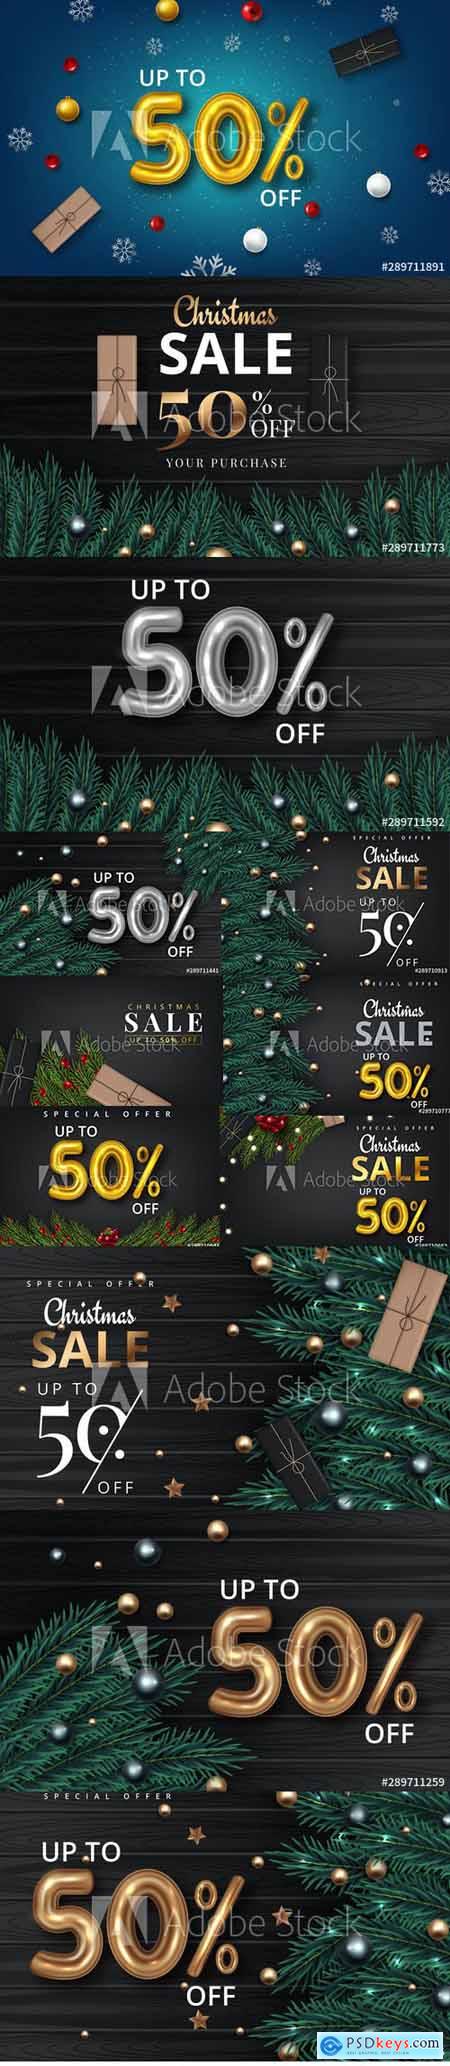 Christmas Sale Promotional Banner for Winter Holiday